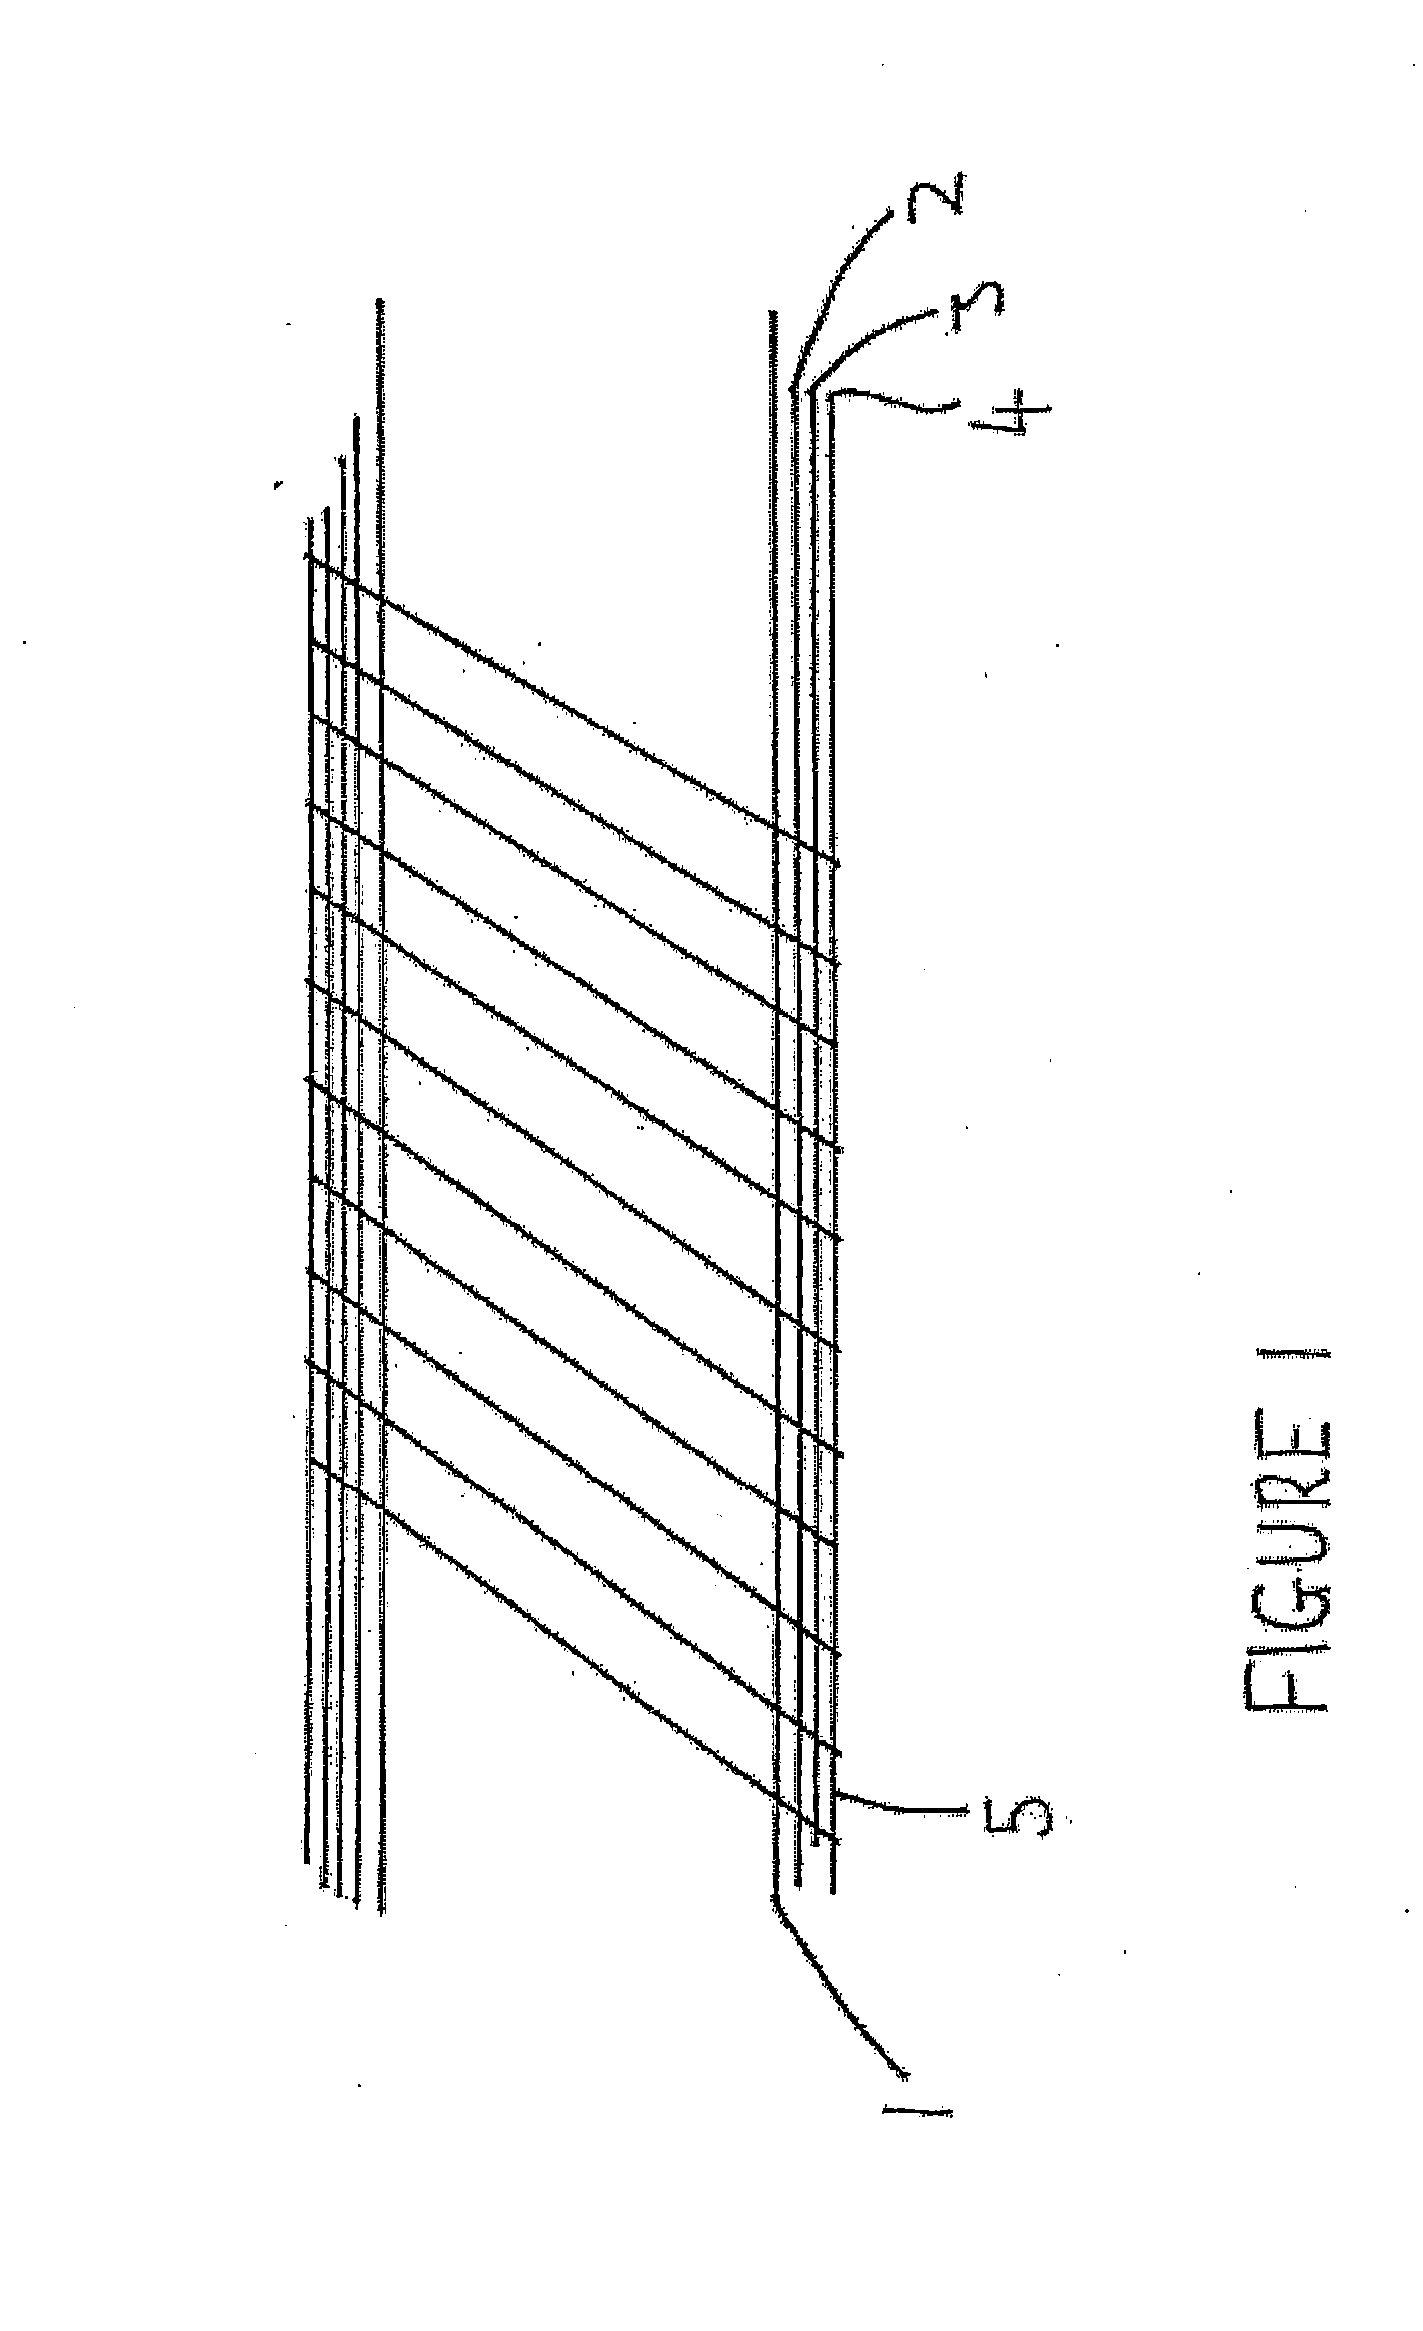 Apparatus and Method for Providing an Interstitial Space